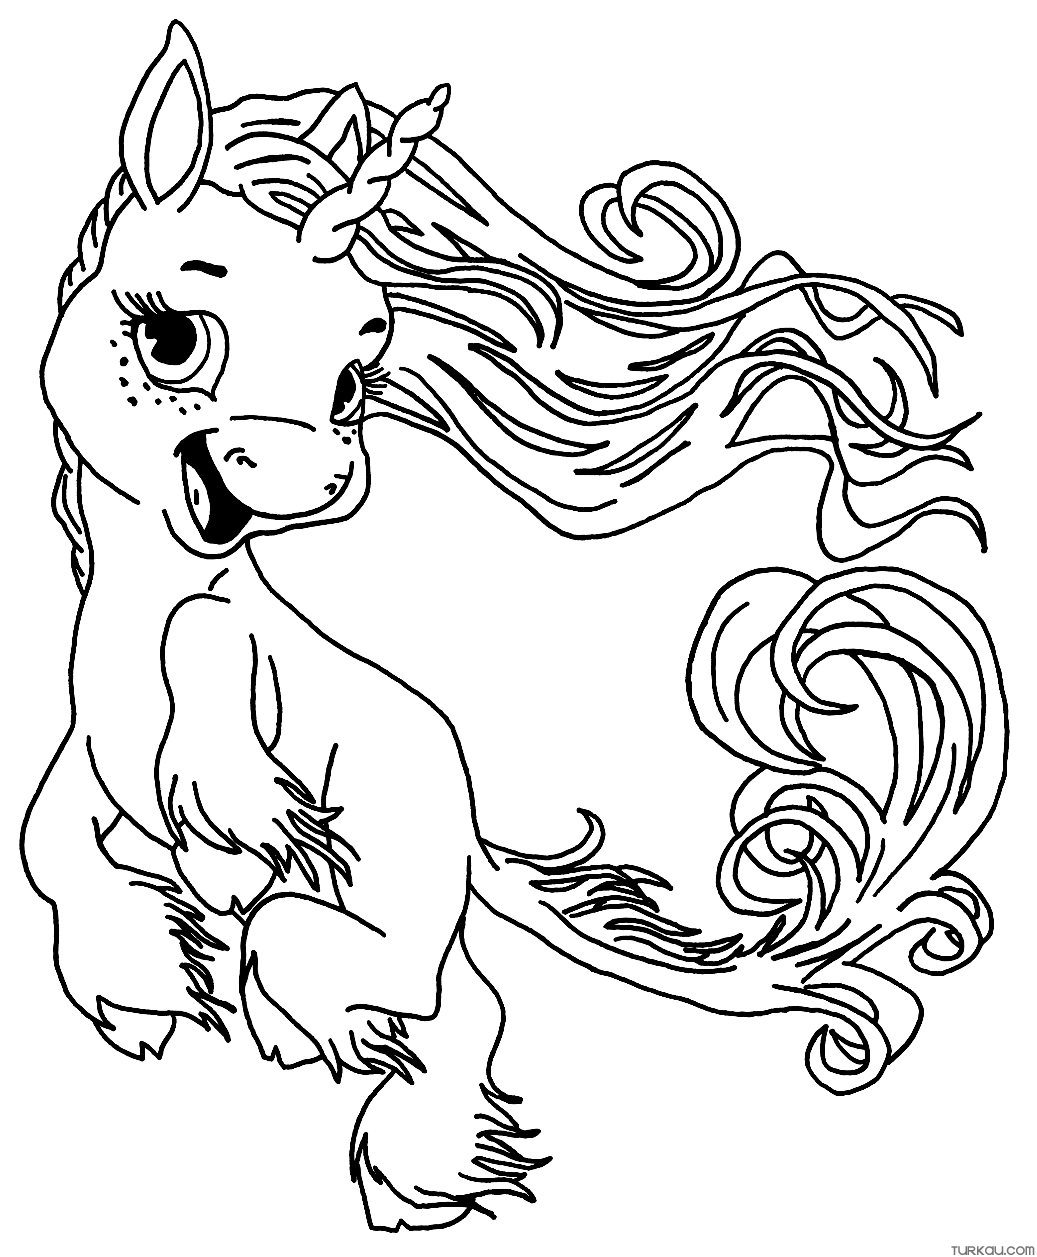 cute-baby-unicorn-coloring-page-for-kids-turkau